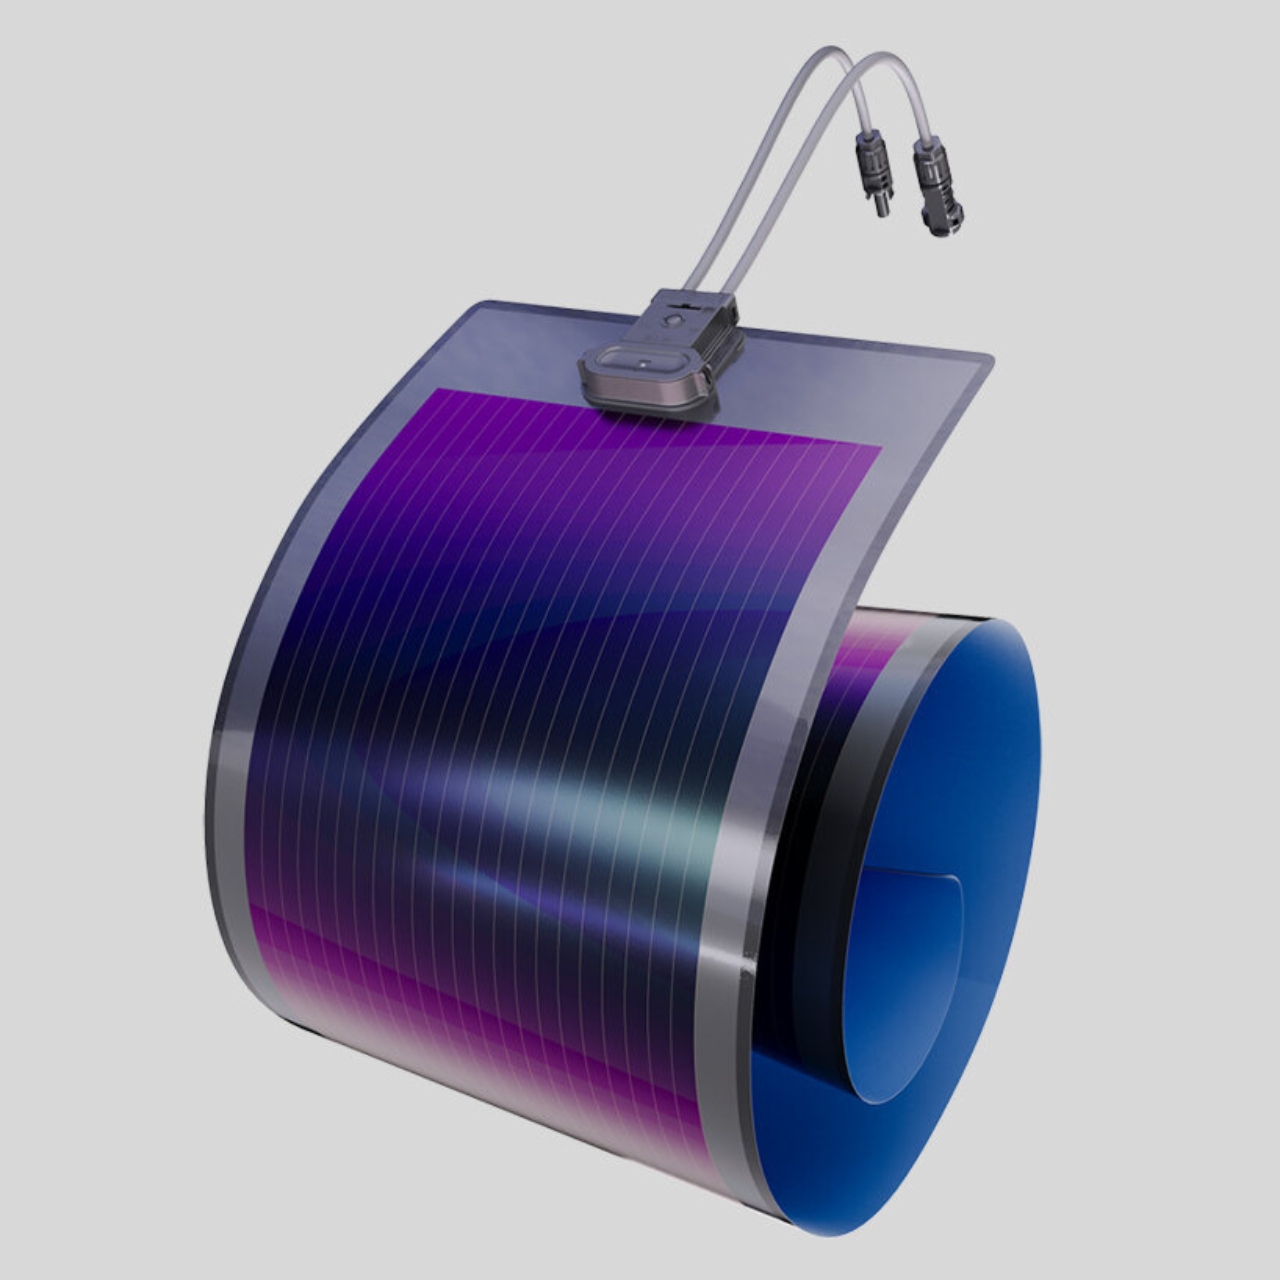 #Solar films may be the more flexible future of solar power